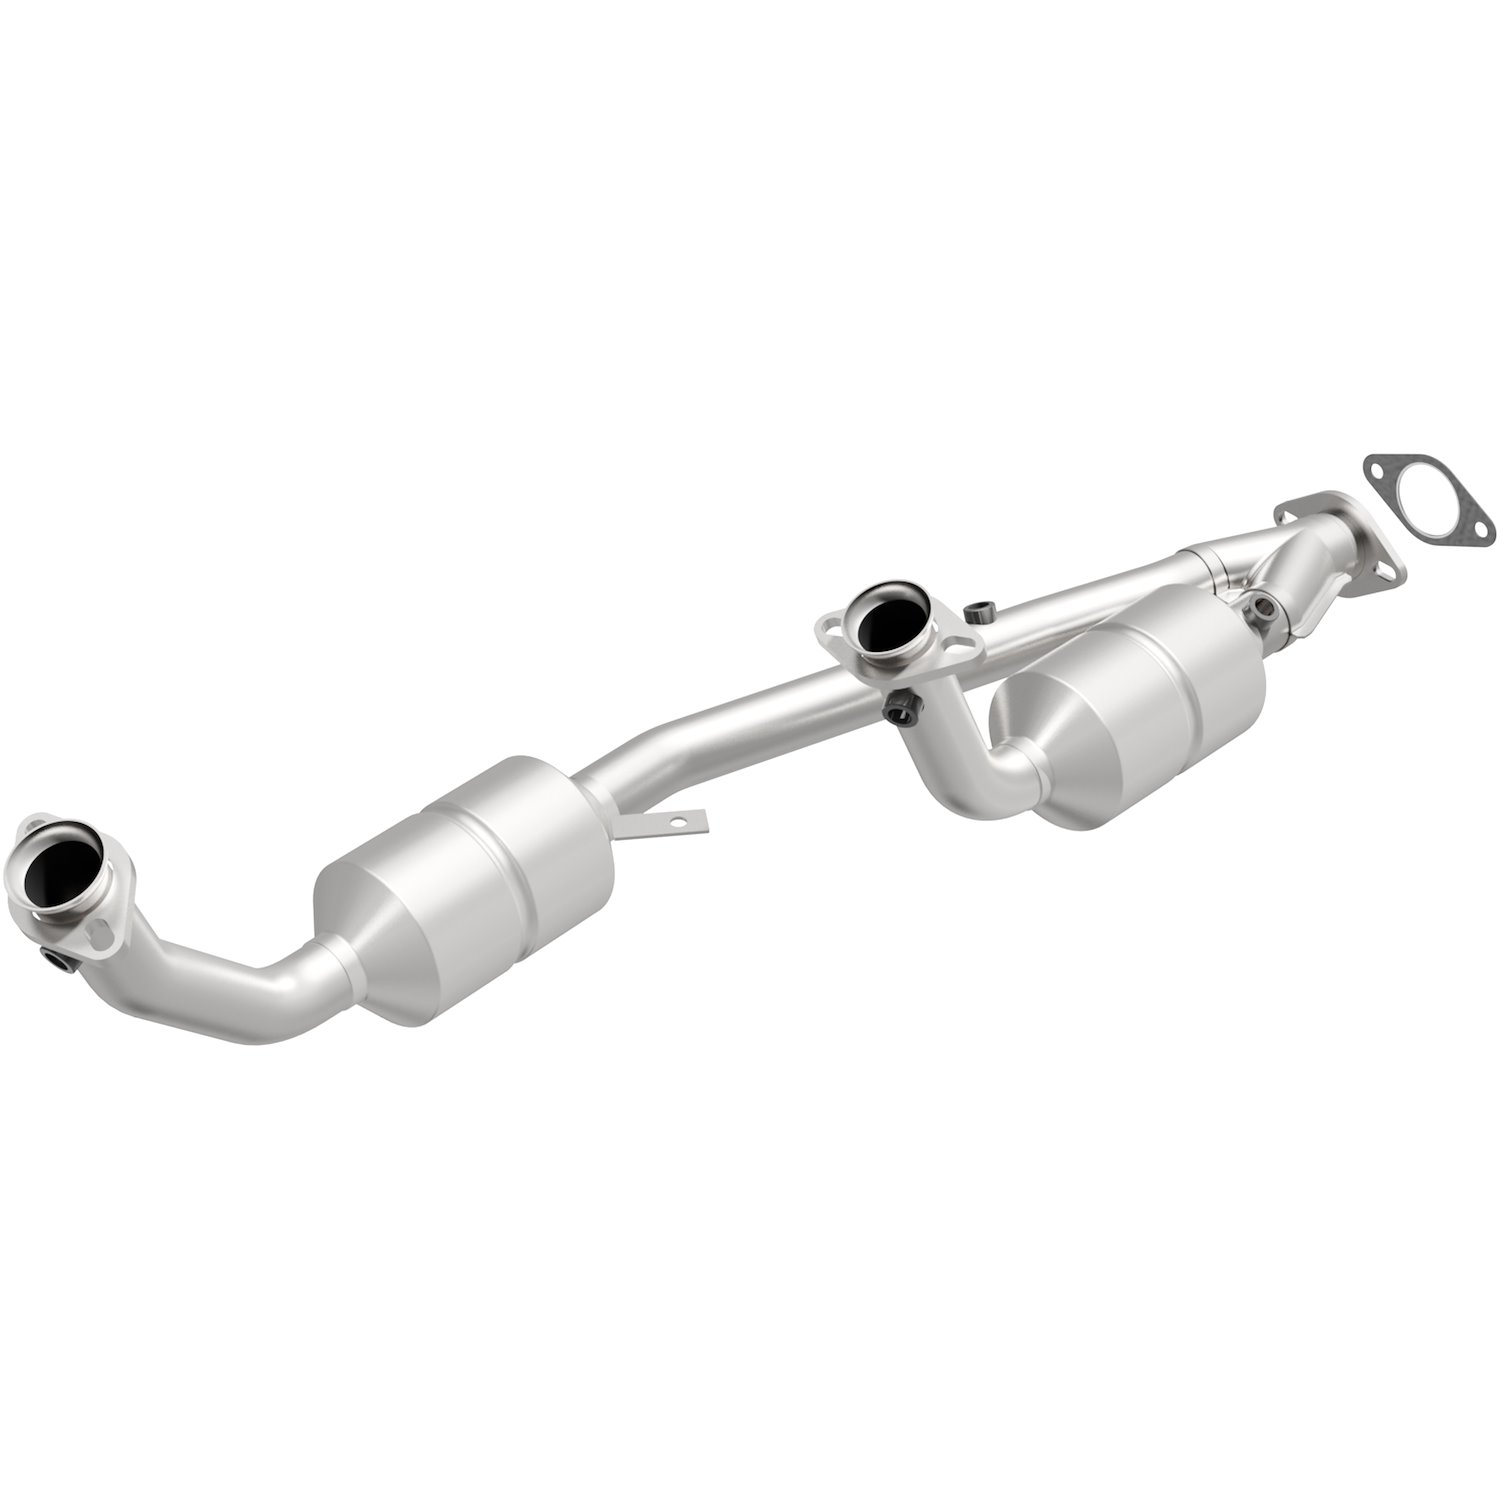 1995-1997 Ford Windstar California Grade CARB Compliant Direct-Fit Catalytic Converter